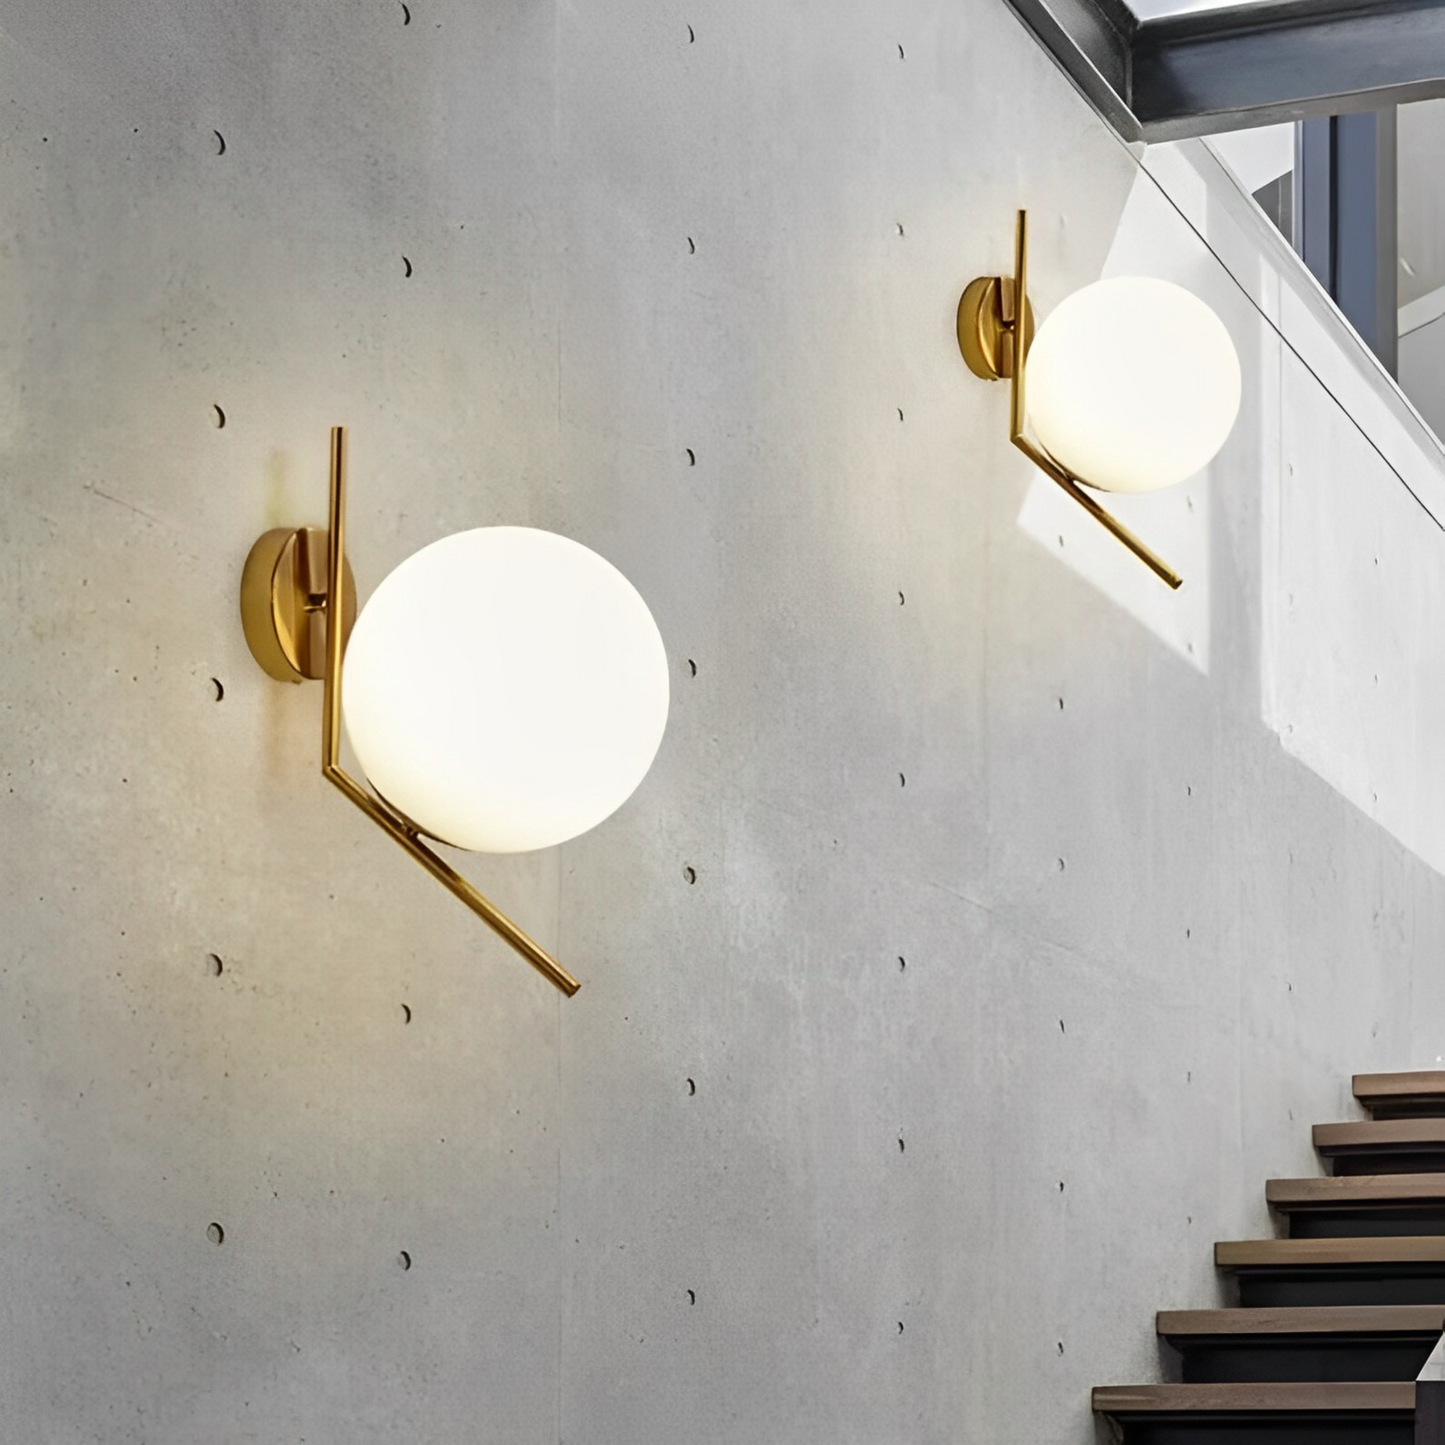 Load image into Gallery viewer, Nordic Metal Wall Light by Gloss (WL-B0042)
